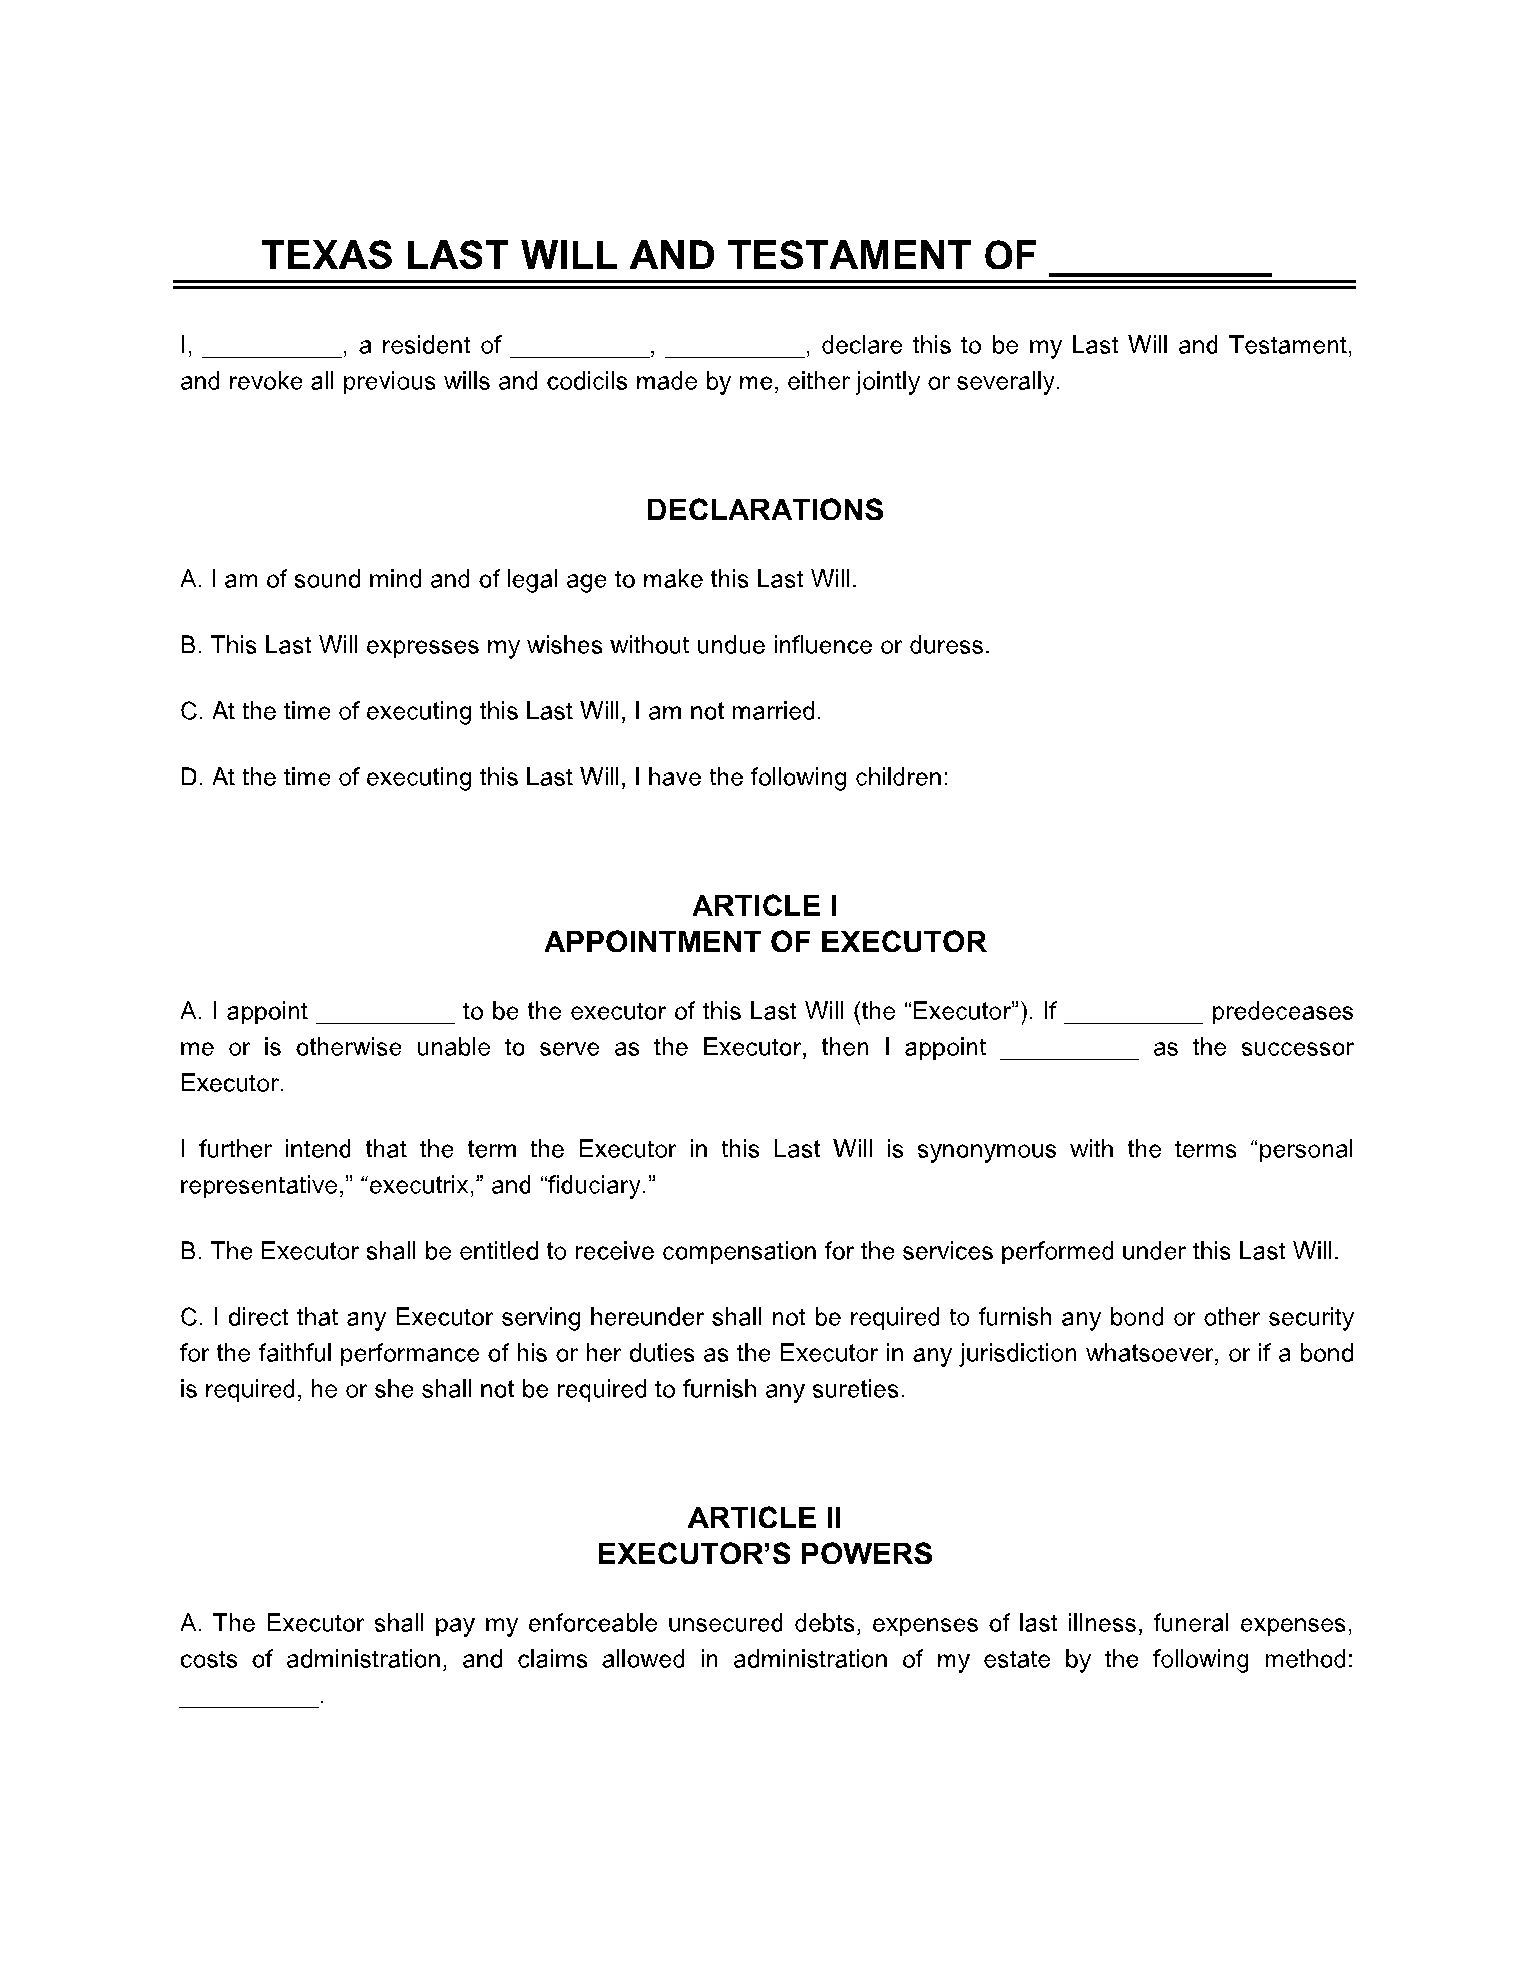 Last Will and Testament Texas 1